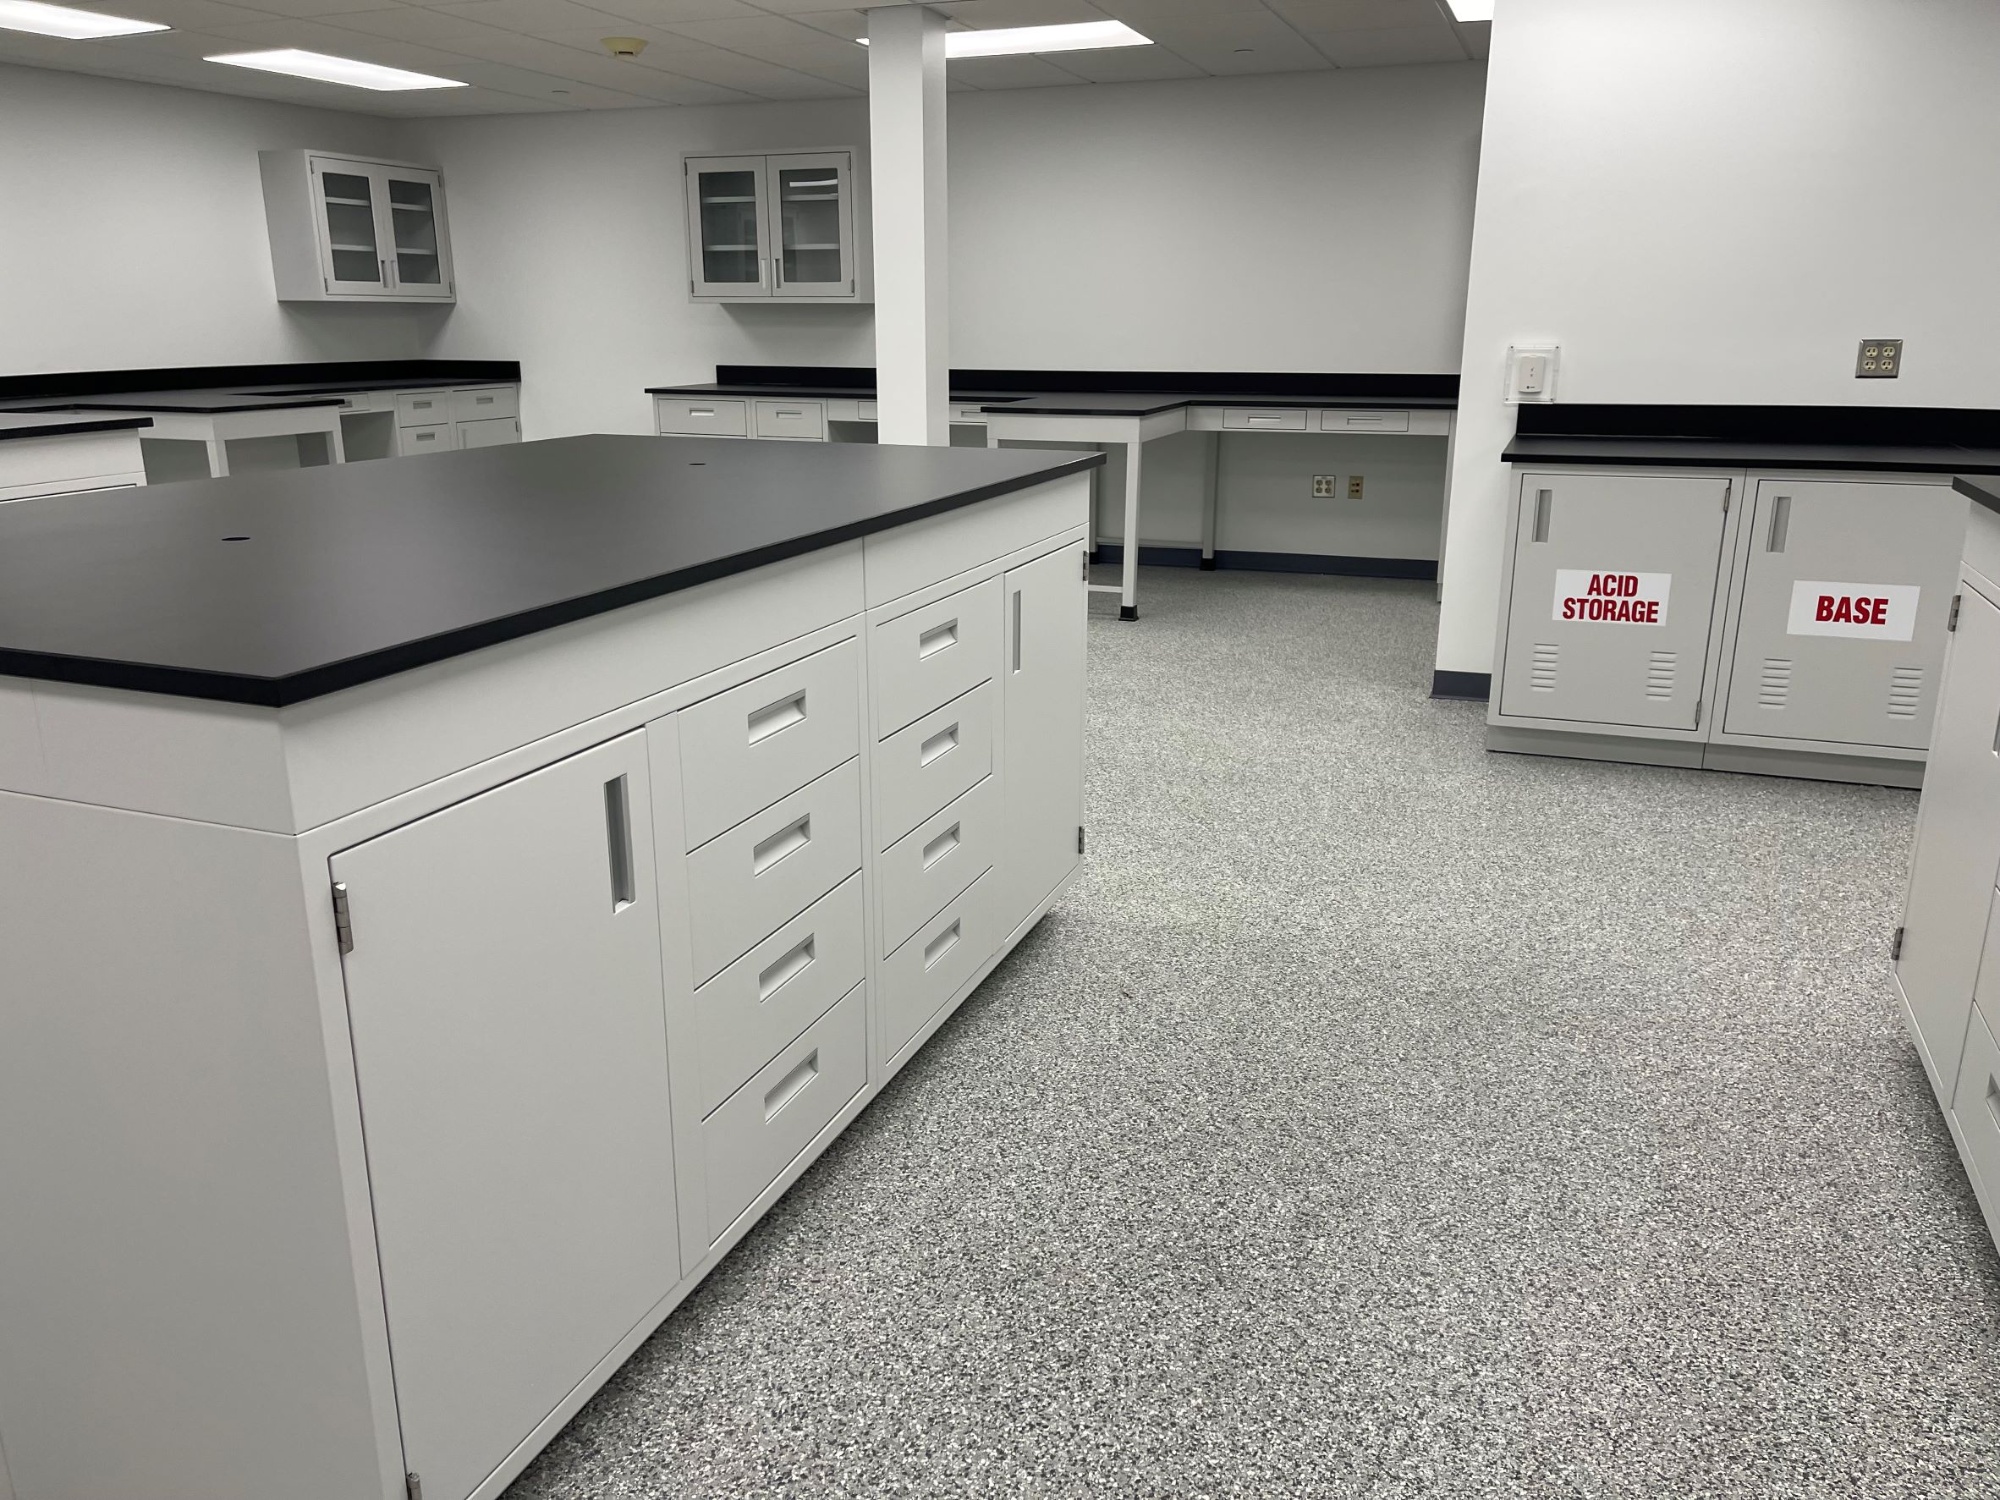 Customized cabinets for higher work space